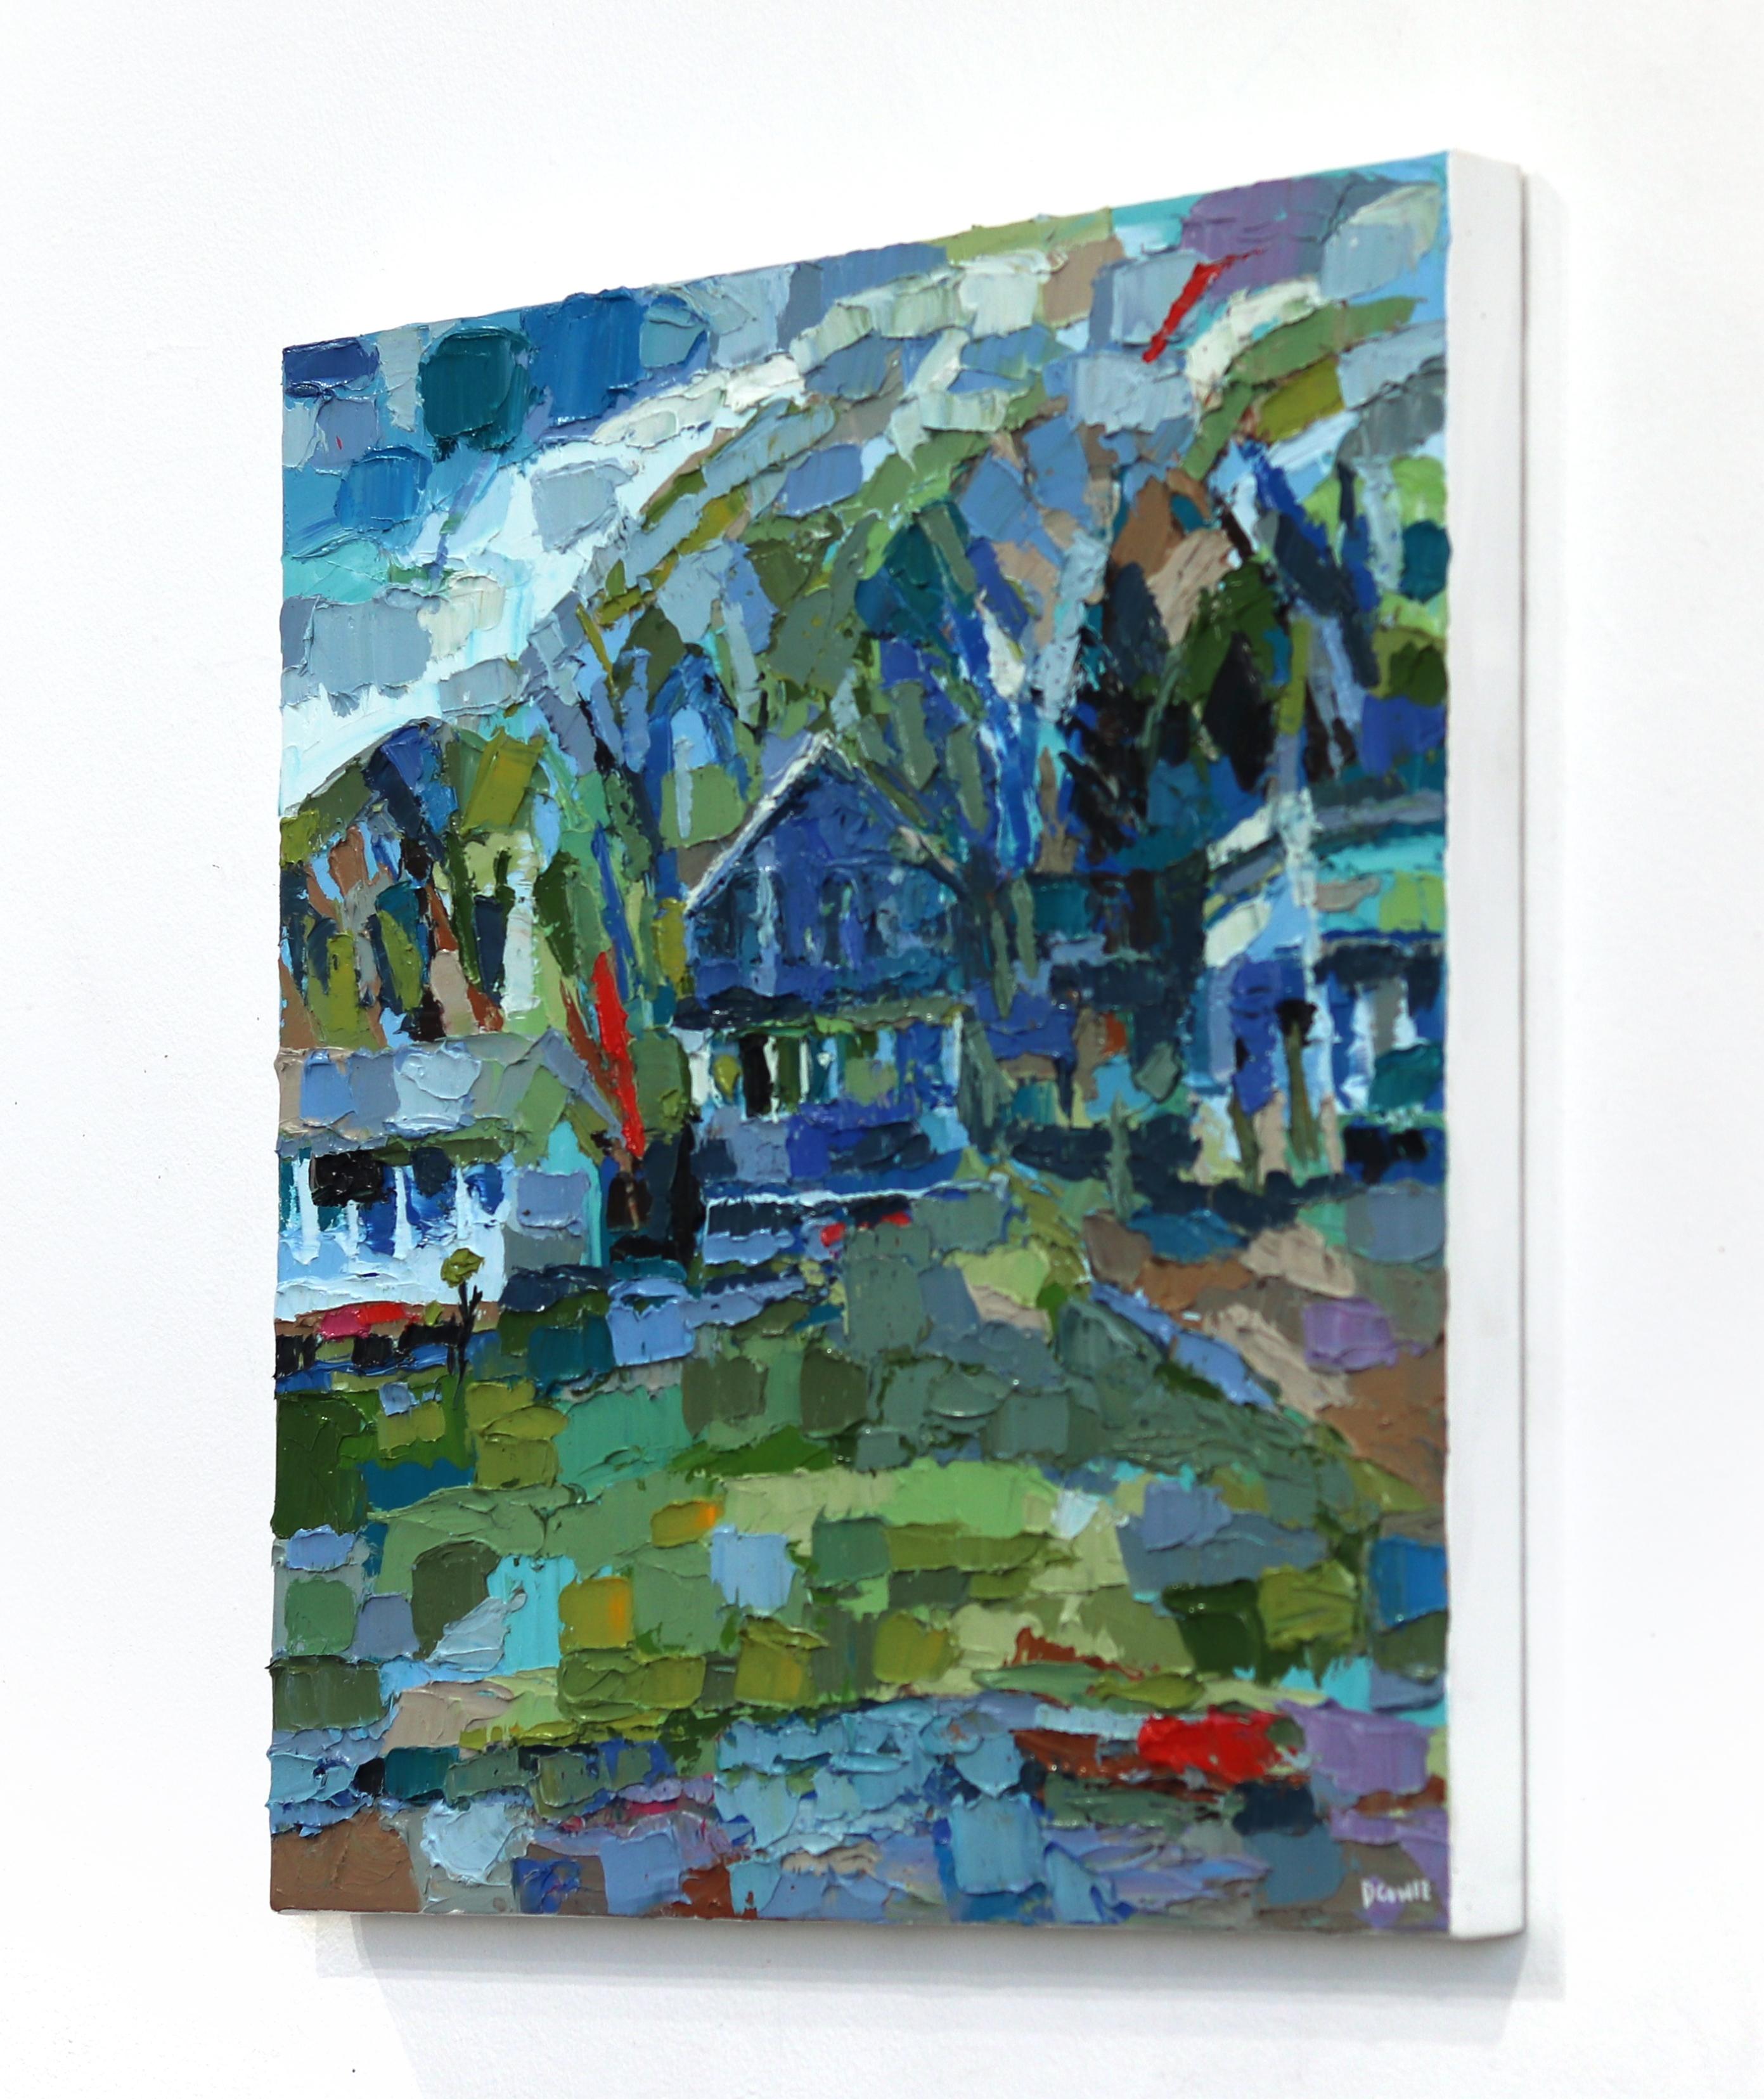 Using an impasto, painterly technique Dana Cowie creates cubist-inspired farm and rural landscapes. Working within controlled color schemes, her artworks appear abstract up close and become more representational as the viewer takes in the larger